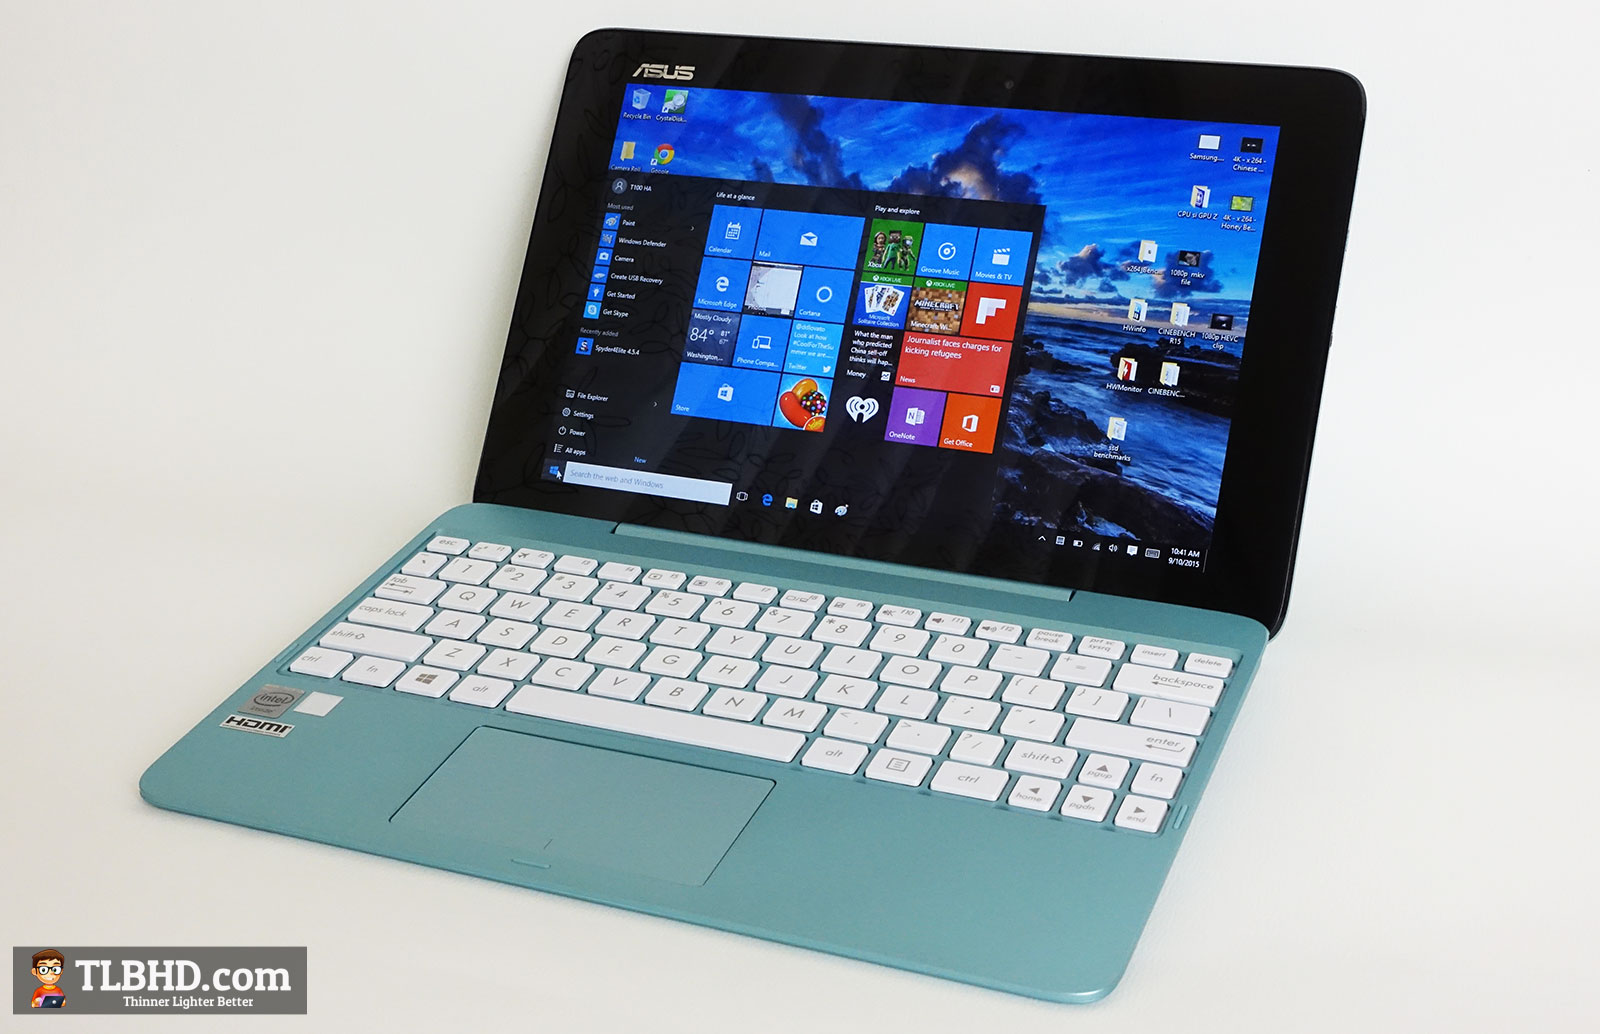 Asus Transformer Book T100HA review - the CherryTrail update